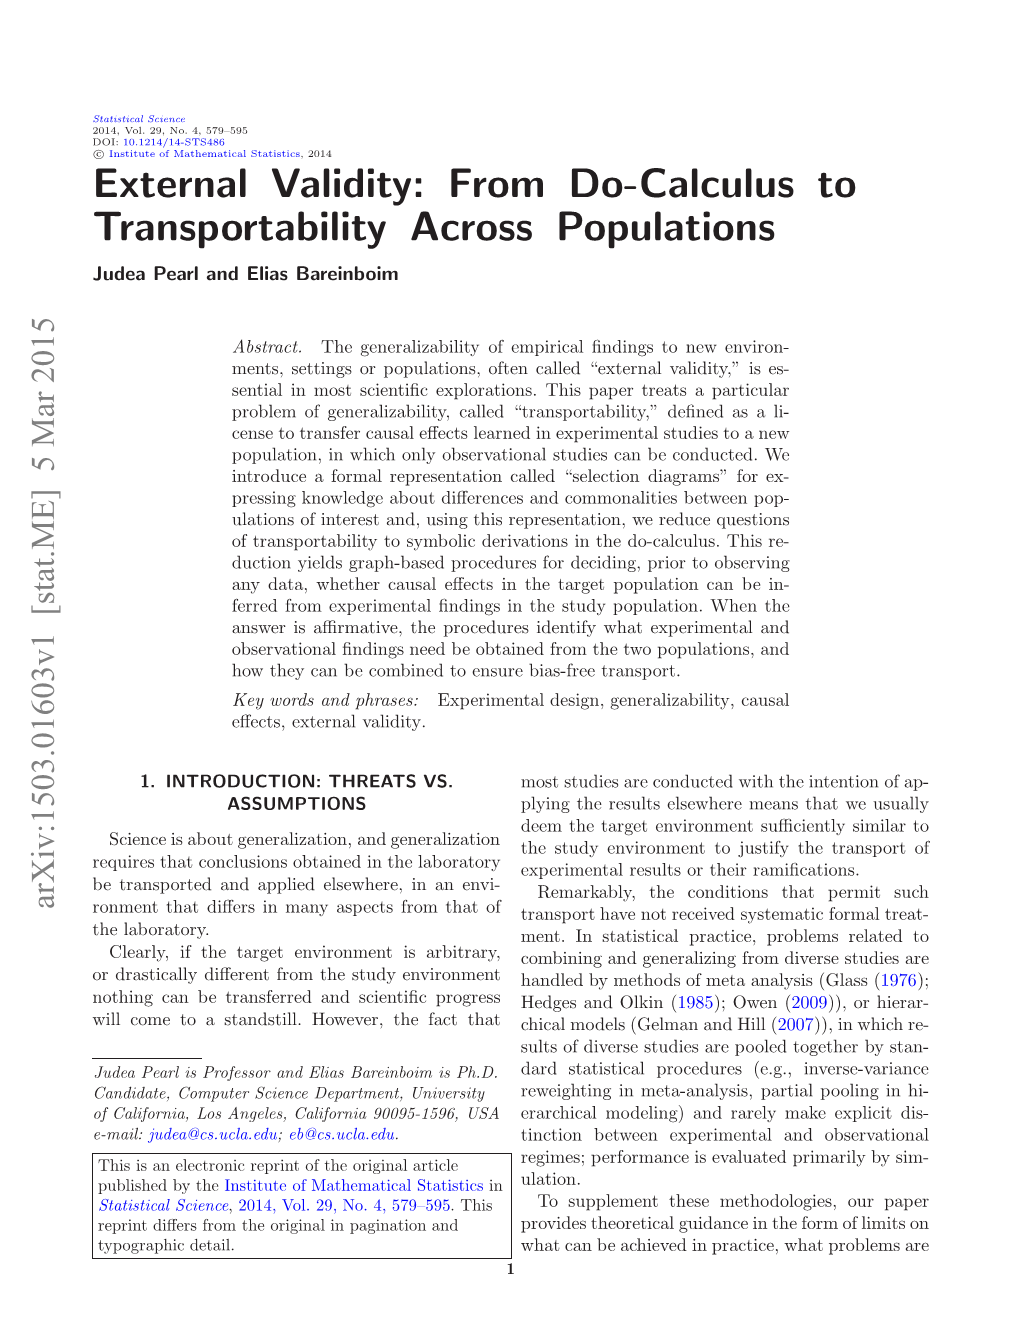 External Validity: from Do-Calculus to Transportability Across Populations